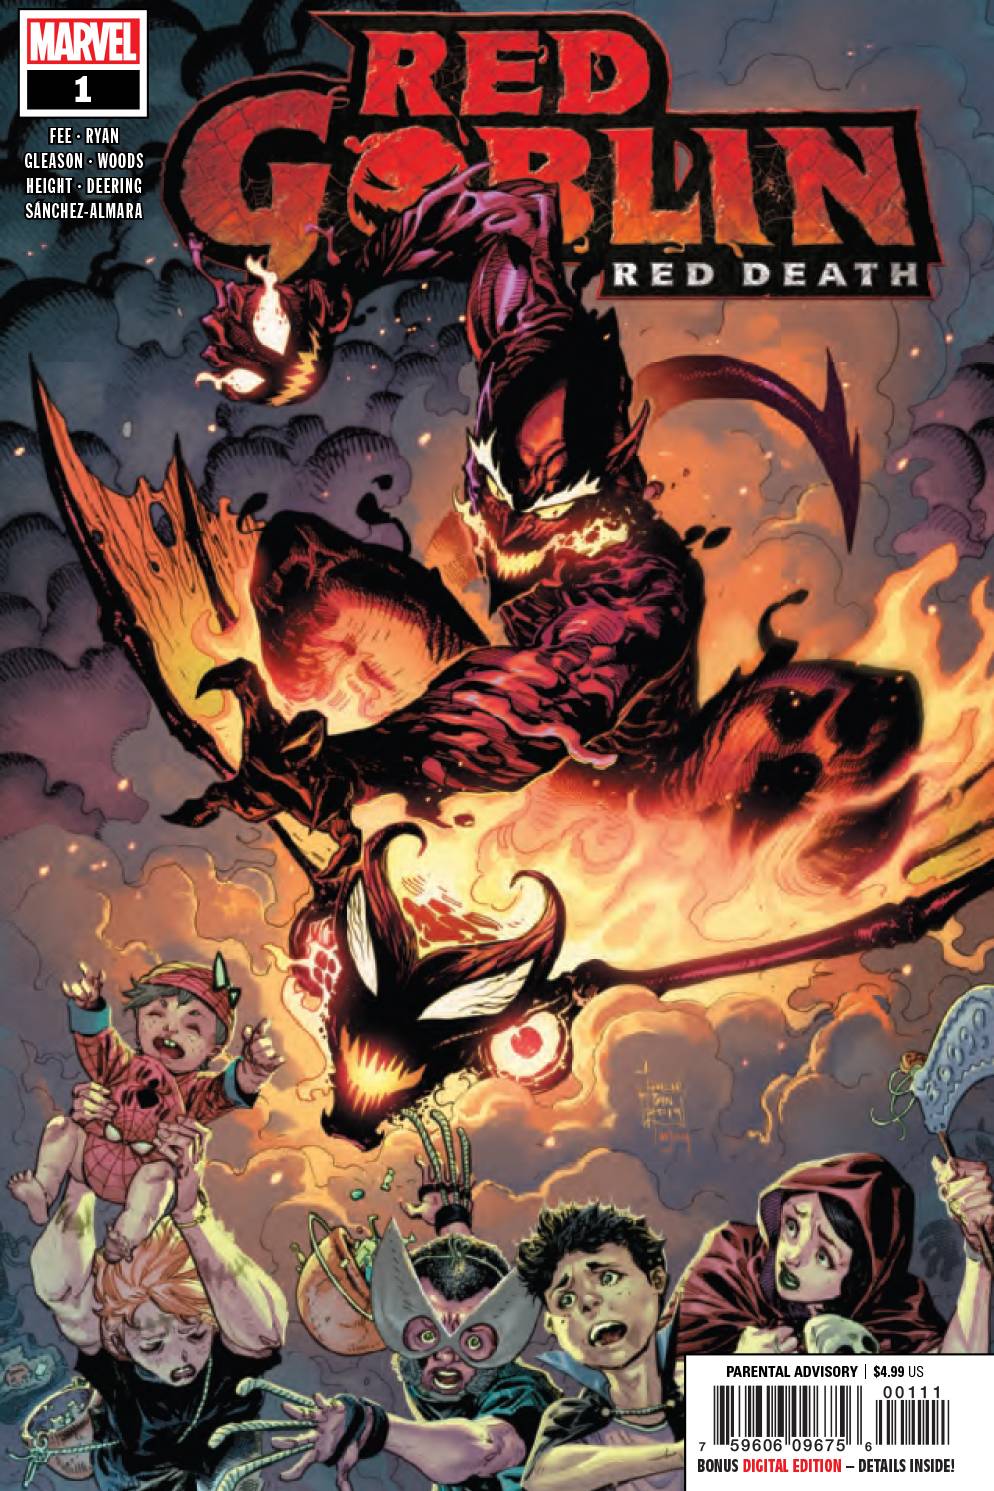 RED GOBLIN RED DEATH 1 RYAN BROWN 1:50 INCENTIVE VARIANT HOT NEW SERIES